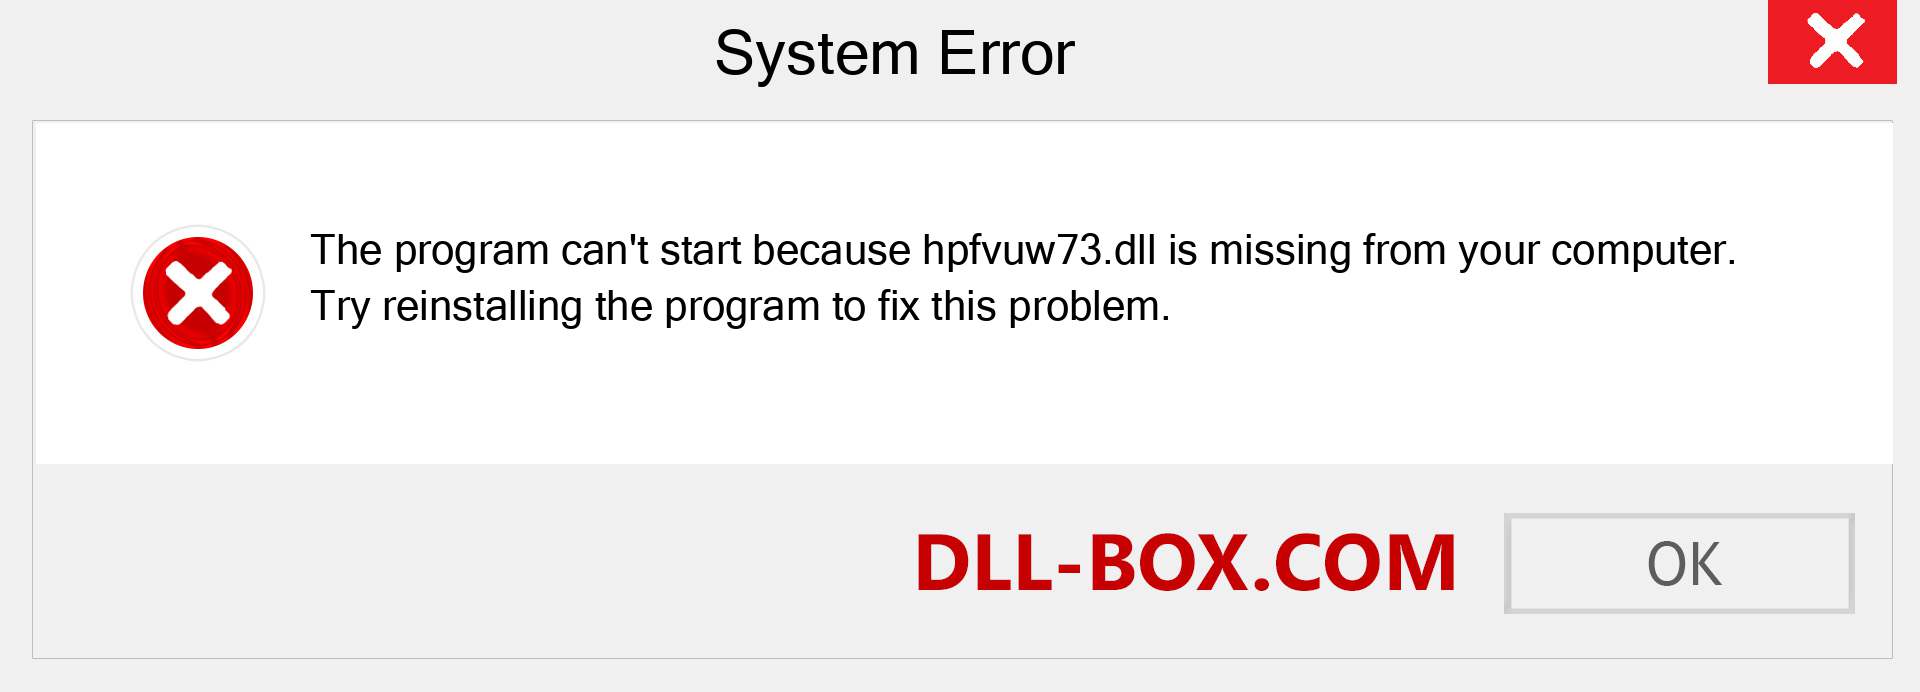  hpfvuw73.dll file is missing?. Download for Windows 7, 8, 10 - Fix  hpfvuw73 dll Missing Error on Windows, photos, images